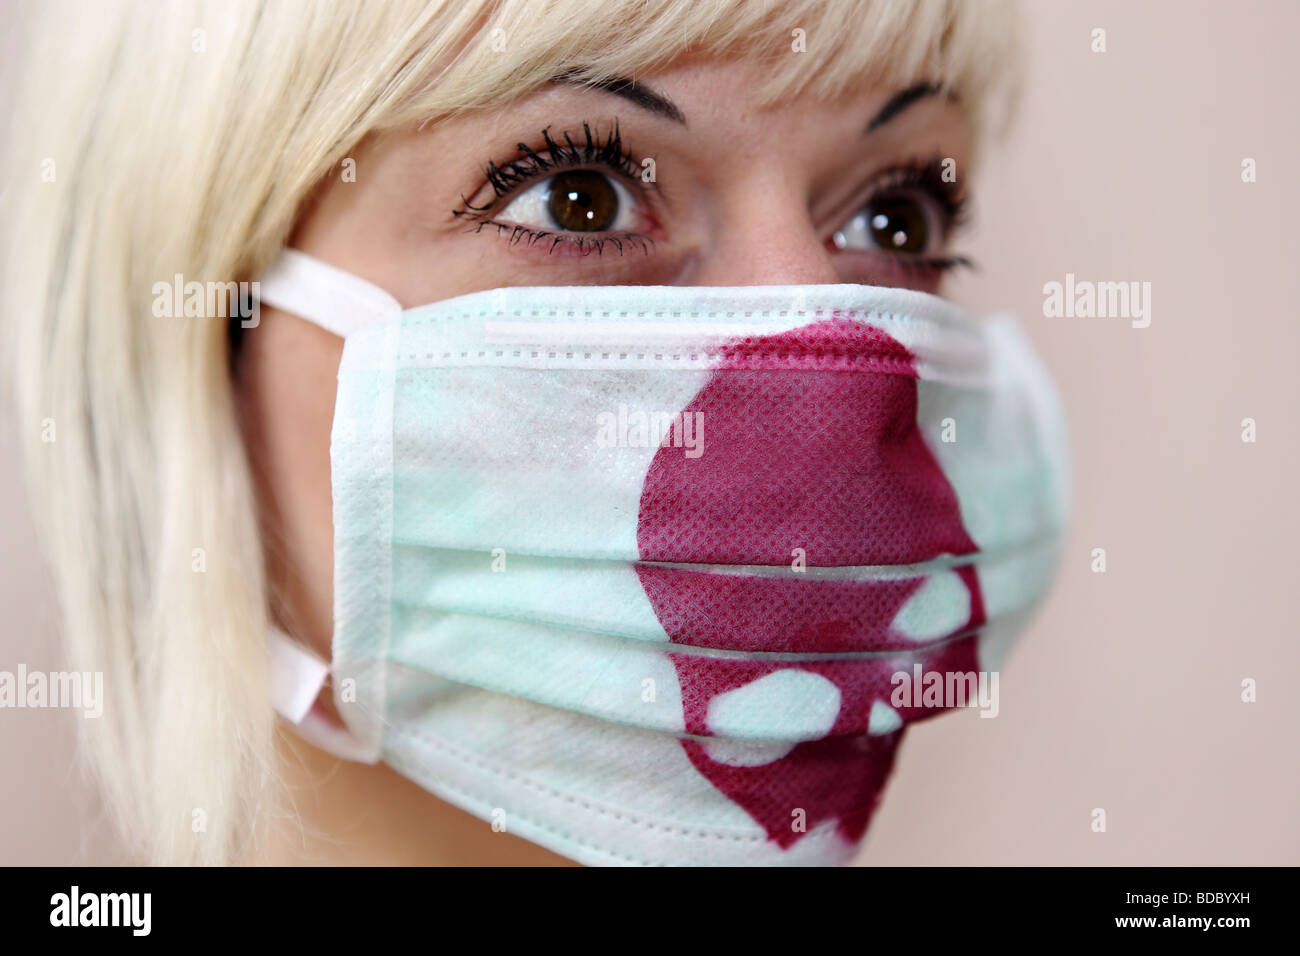 A blond girl wears a customized surgical face mask with a red skull printed. Stock Photo